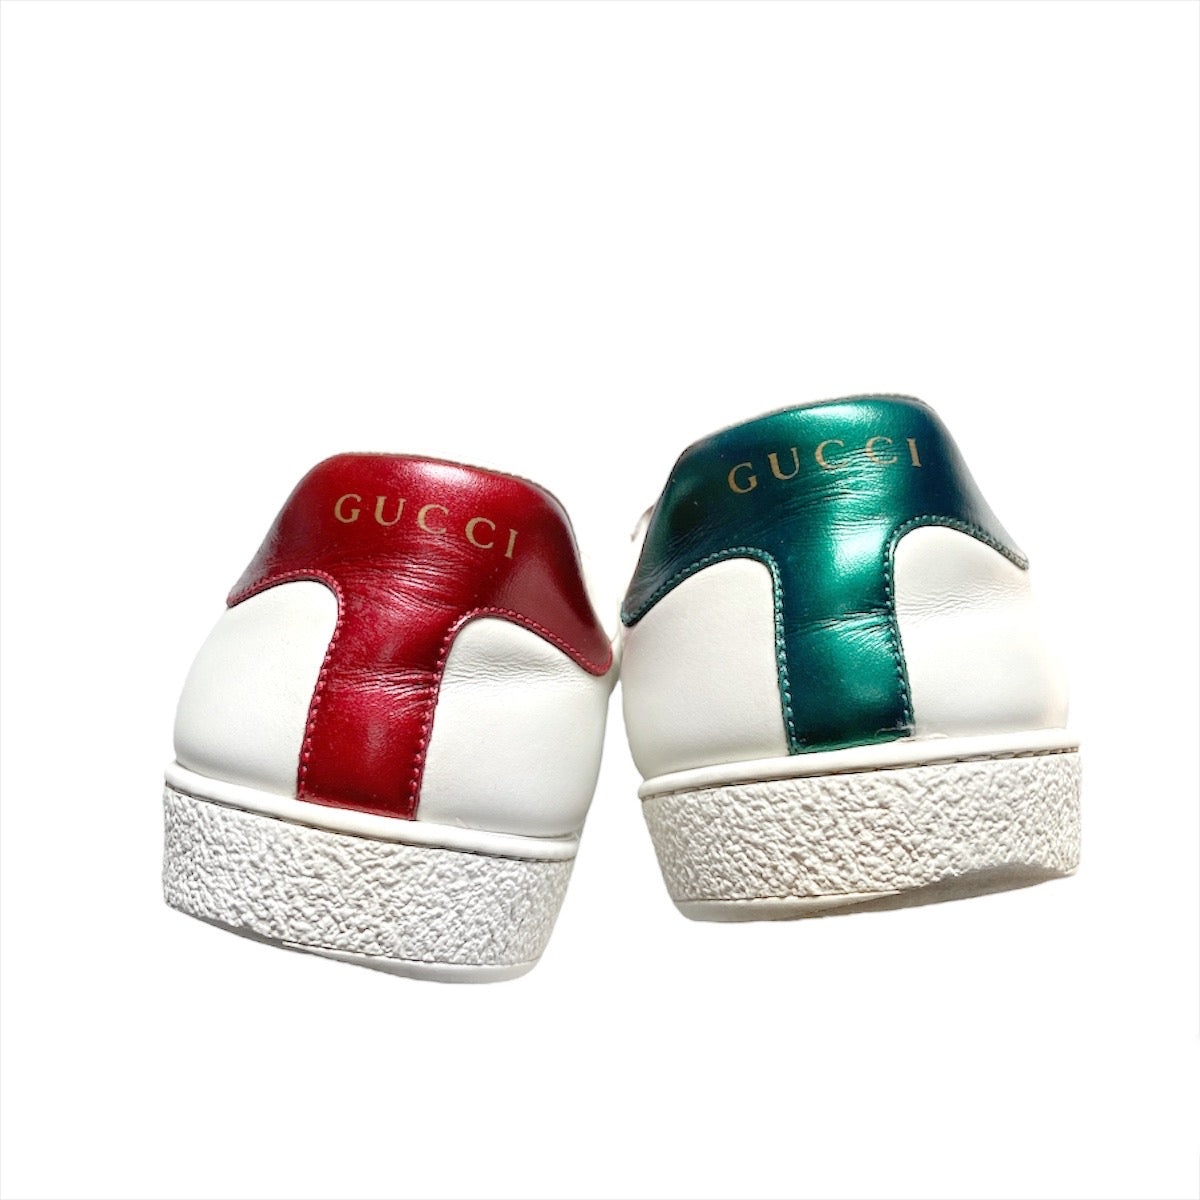 Gucci cherry ace sneakers 37.5 - 6